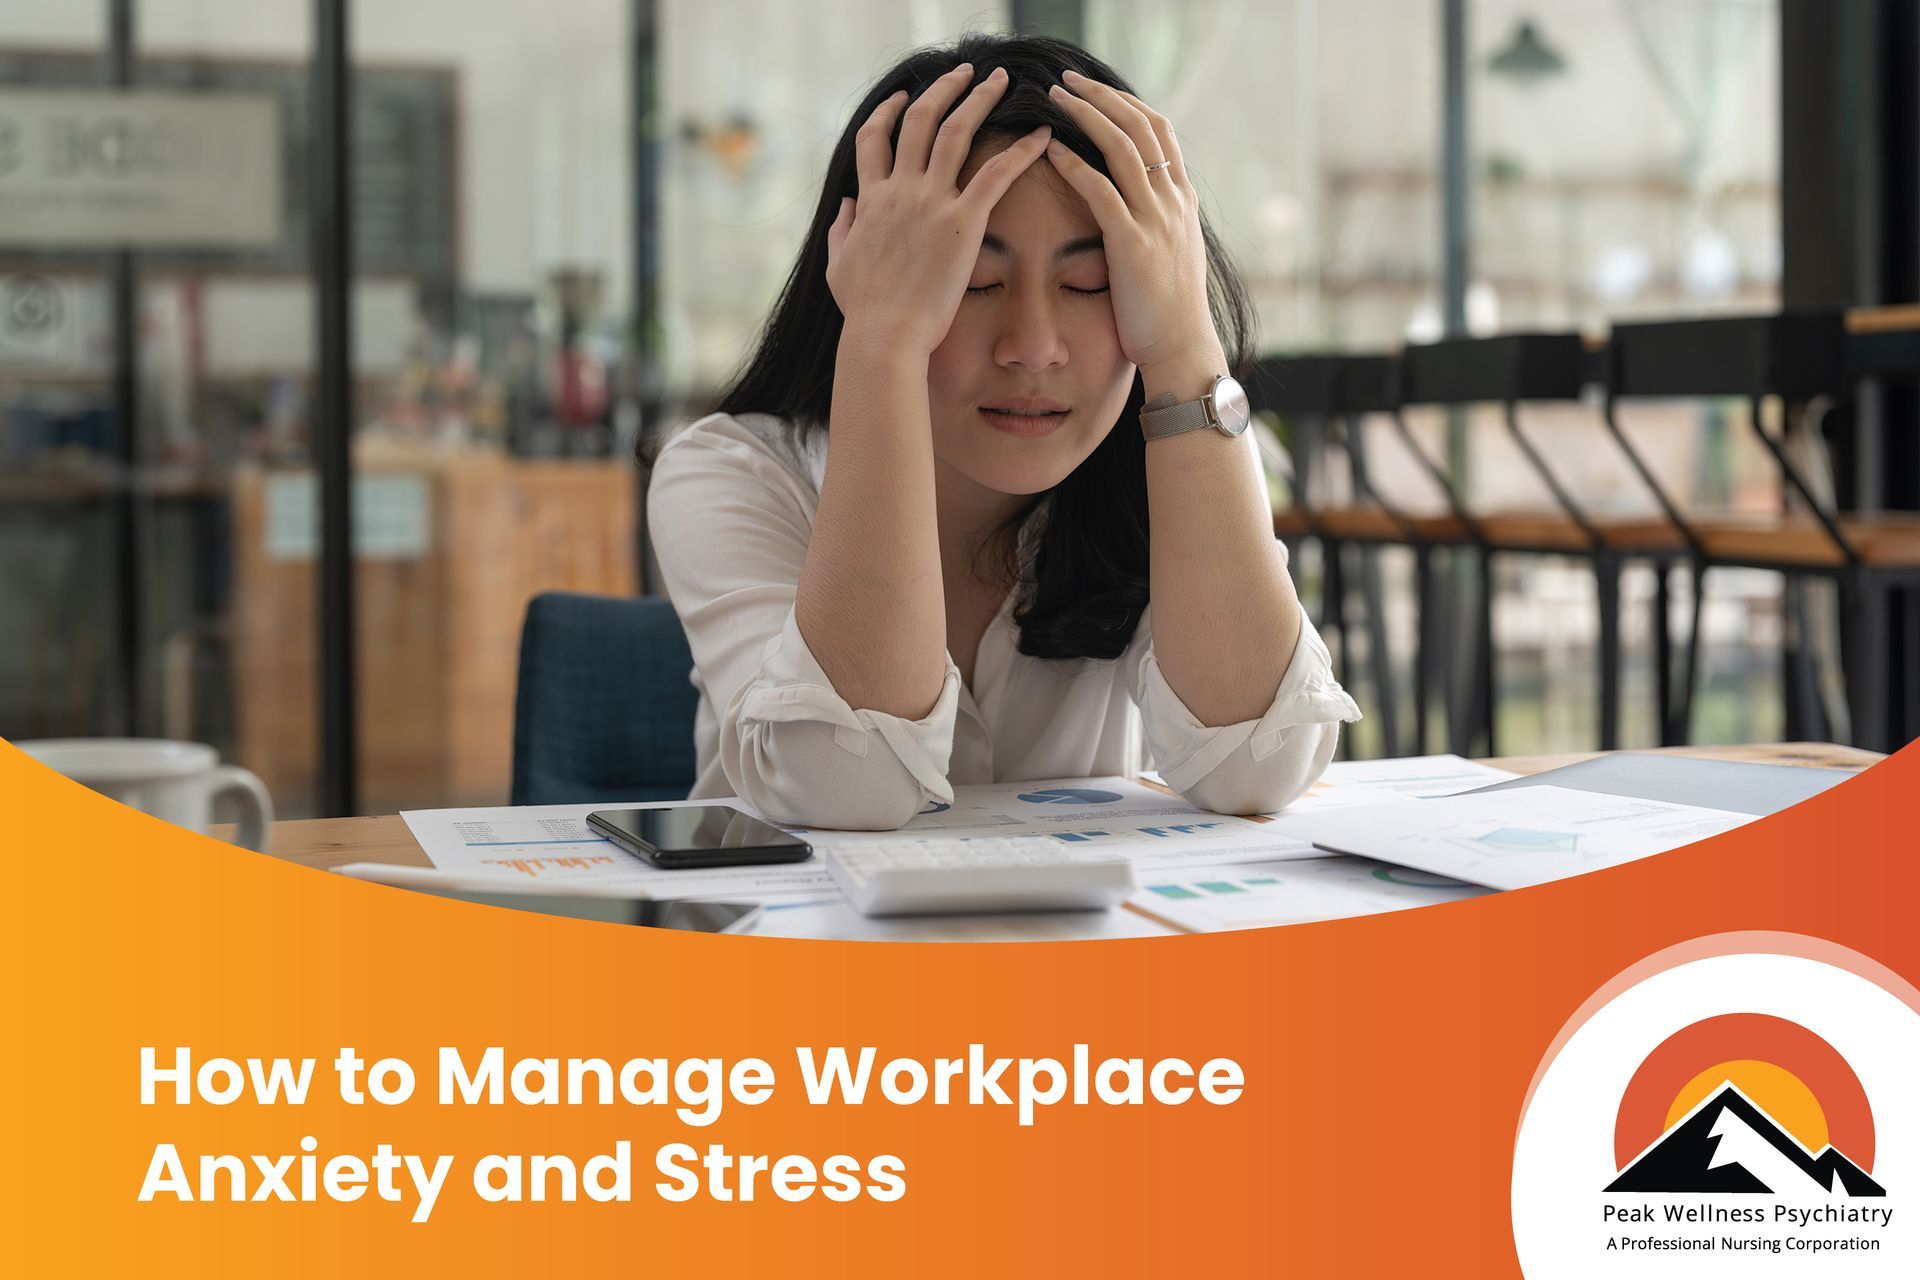 How to Manage Workplace Anxiety and Stress